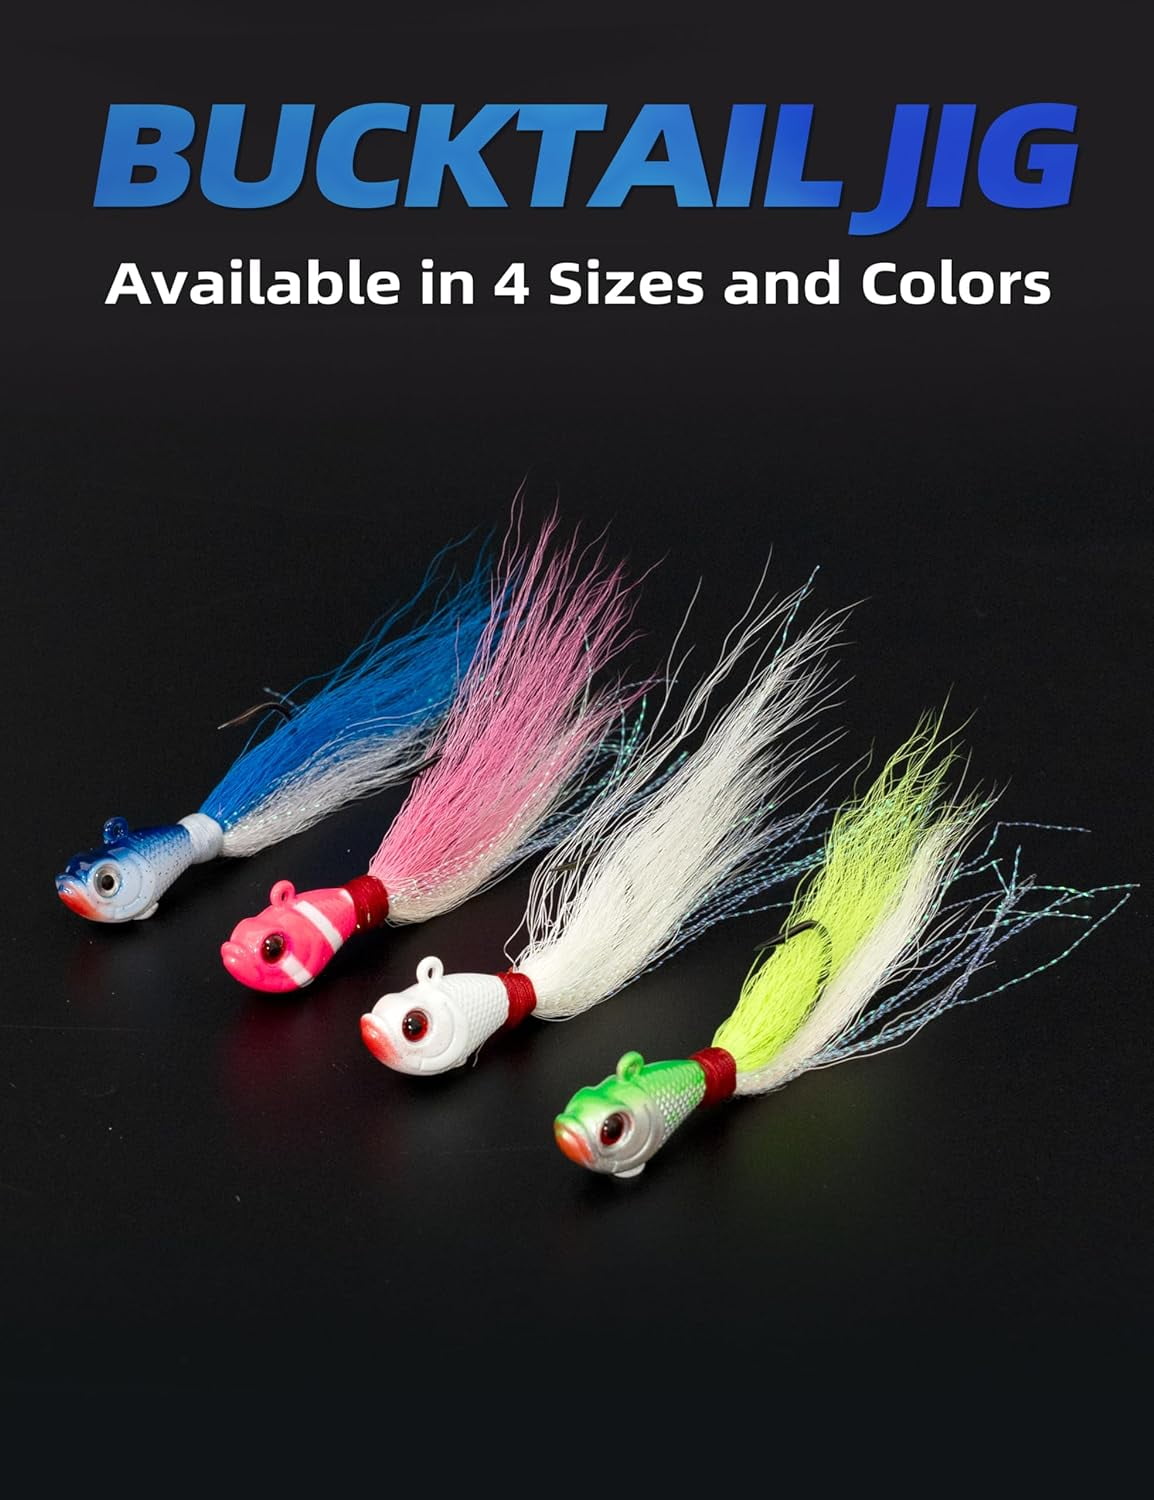 BLUEWING 2pcs Bucktail Jig Lure with High Carbon Steel Hook 1oz Lead Head  Jig Hair Jig Saltwater Freshwater Lures Fluke Lure for Bluefish, Bass  Fishing 